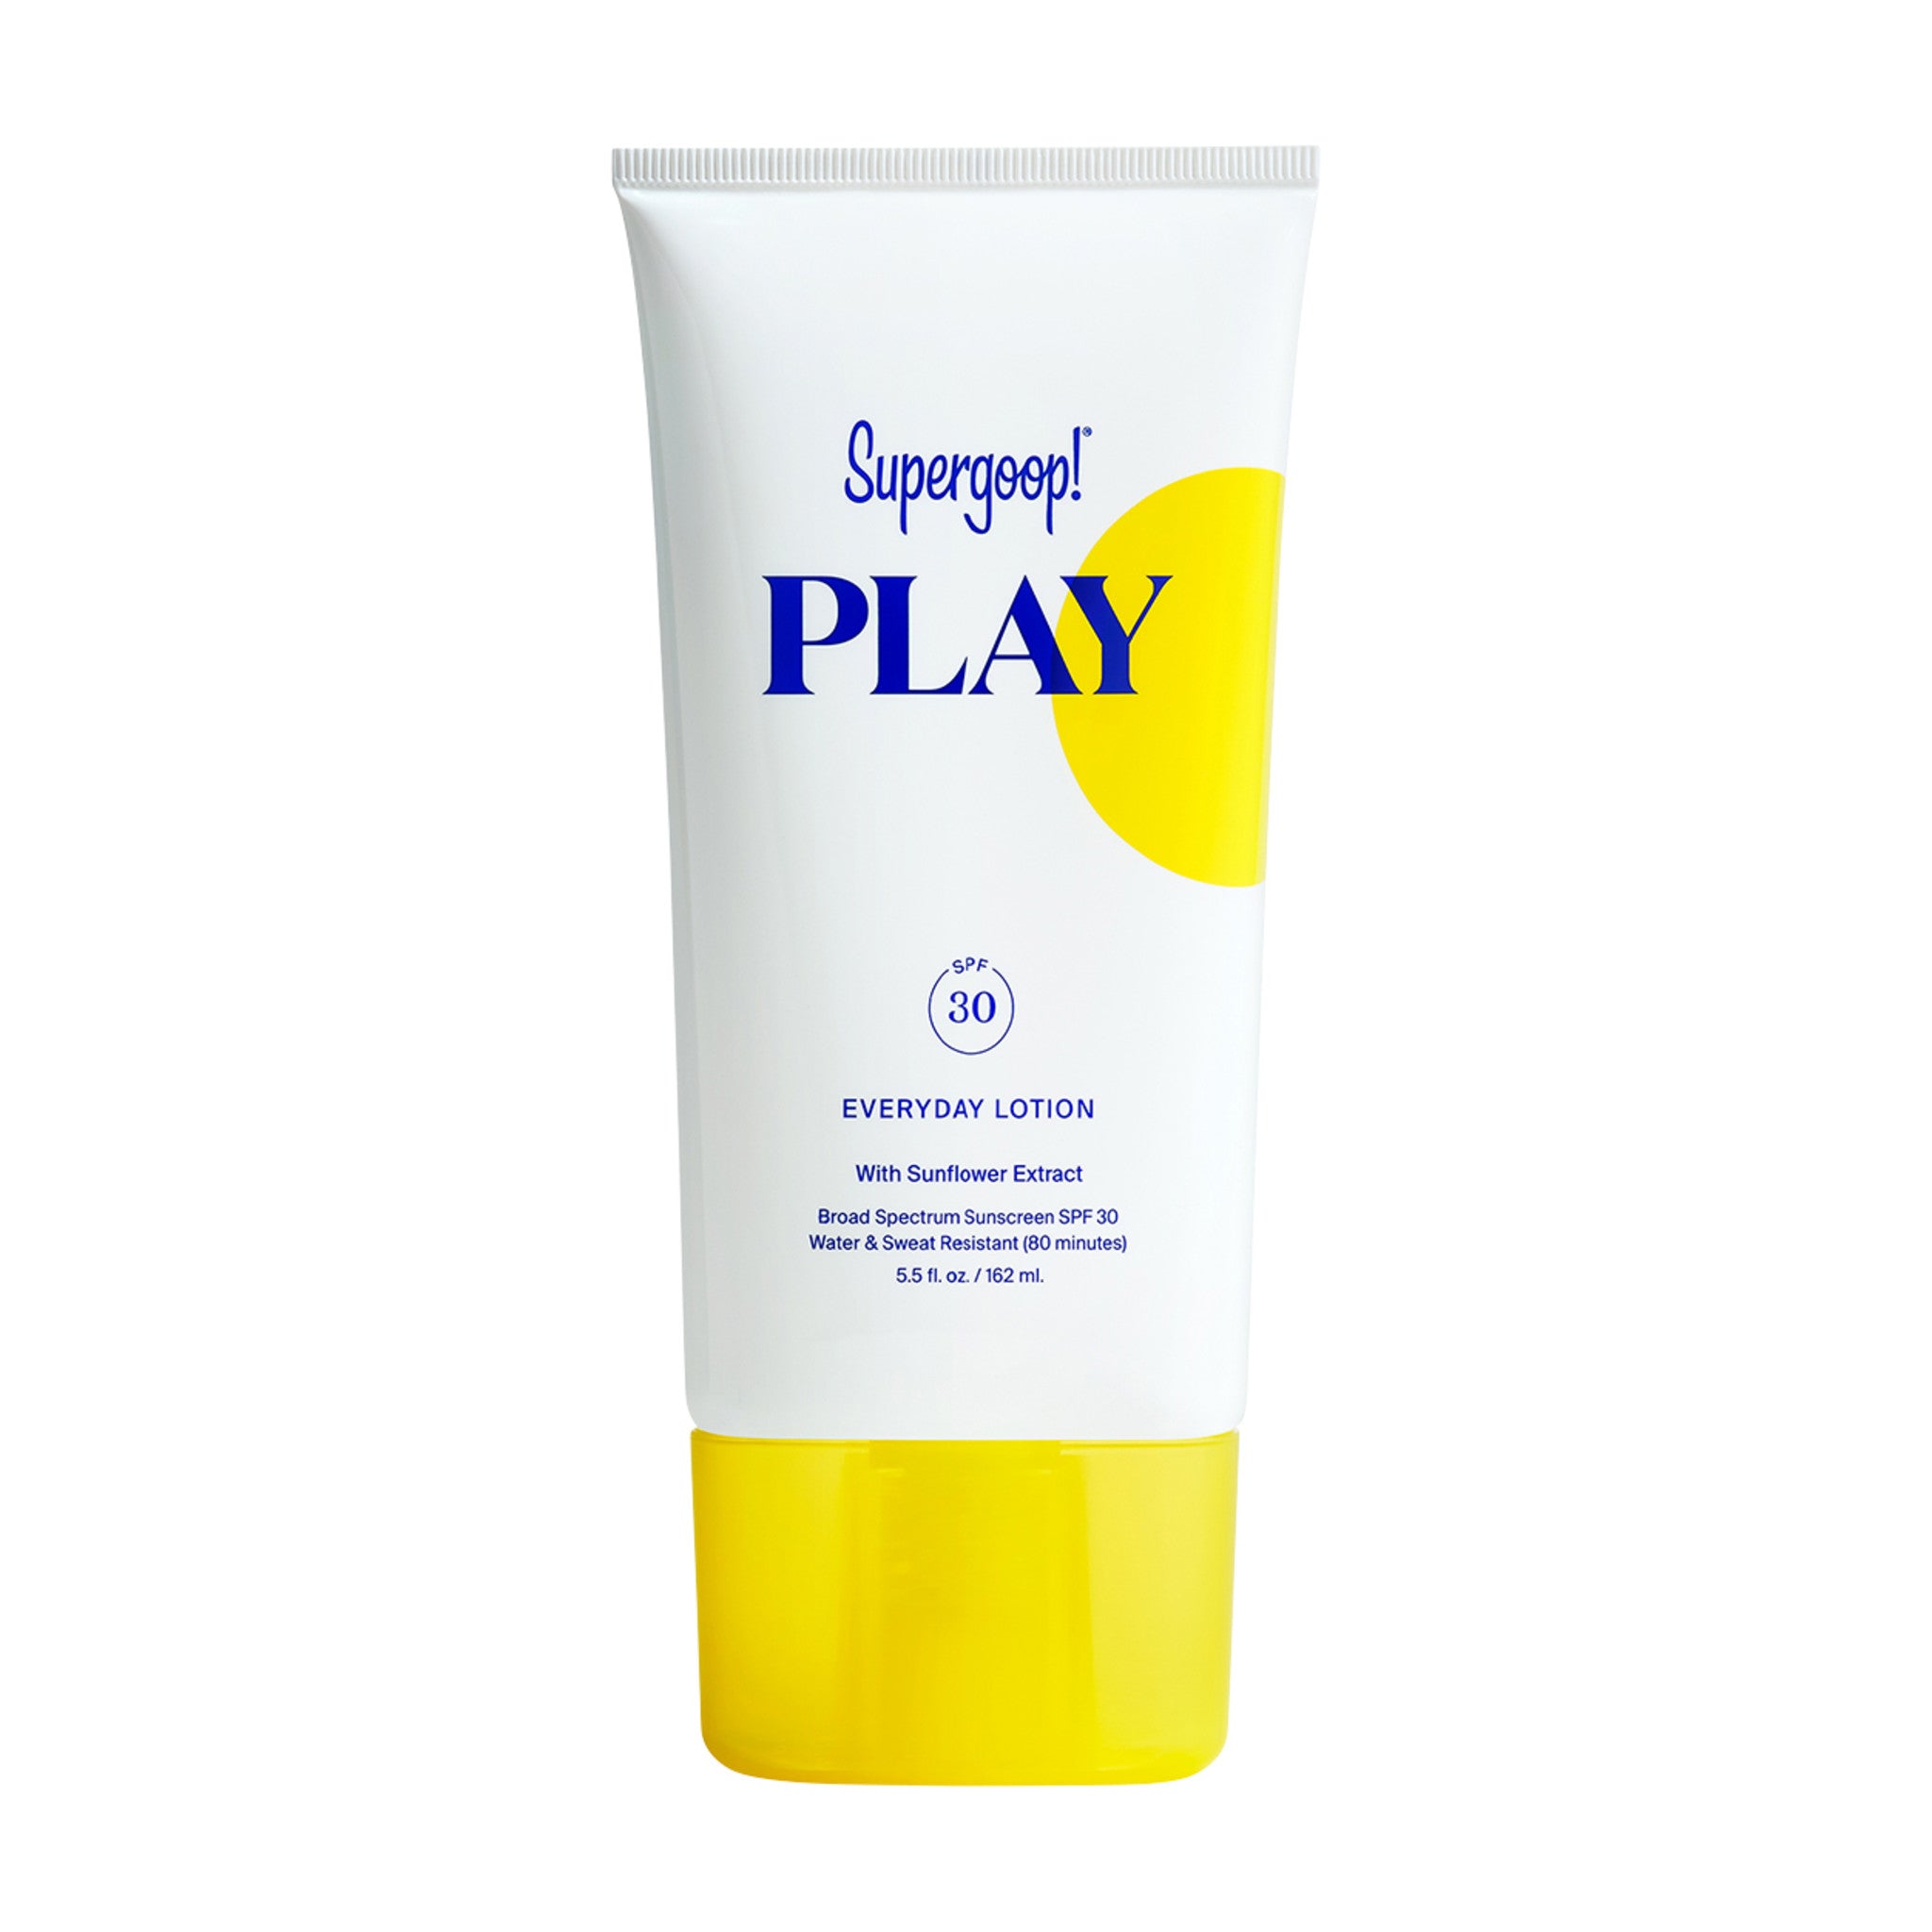 Supergoop! Play Everyday Lotion With Sunflower Extract SPF 30 Size variant: 5.5. fl oz main image.